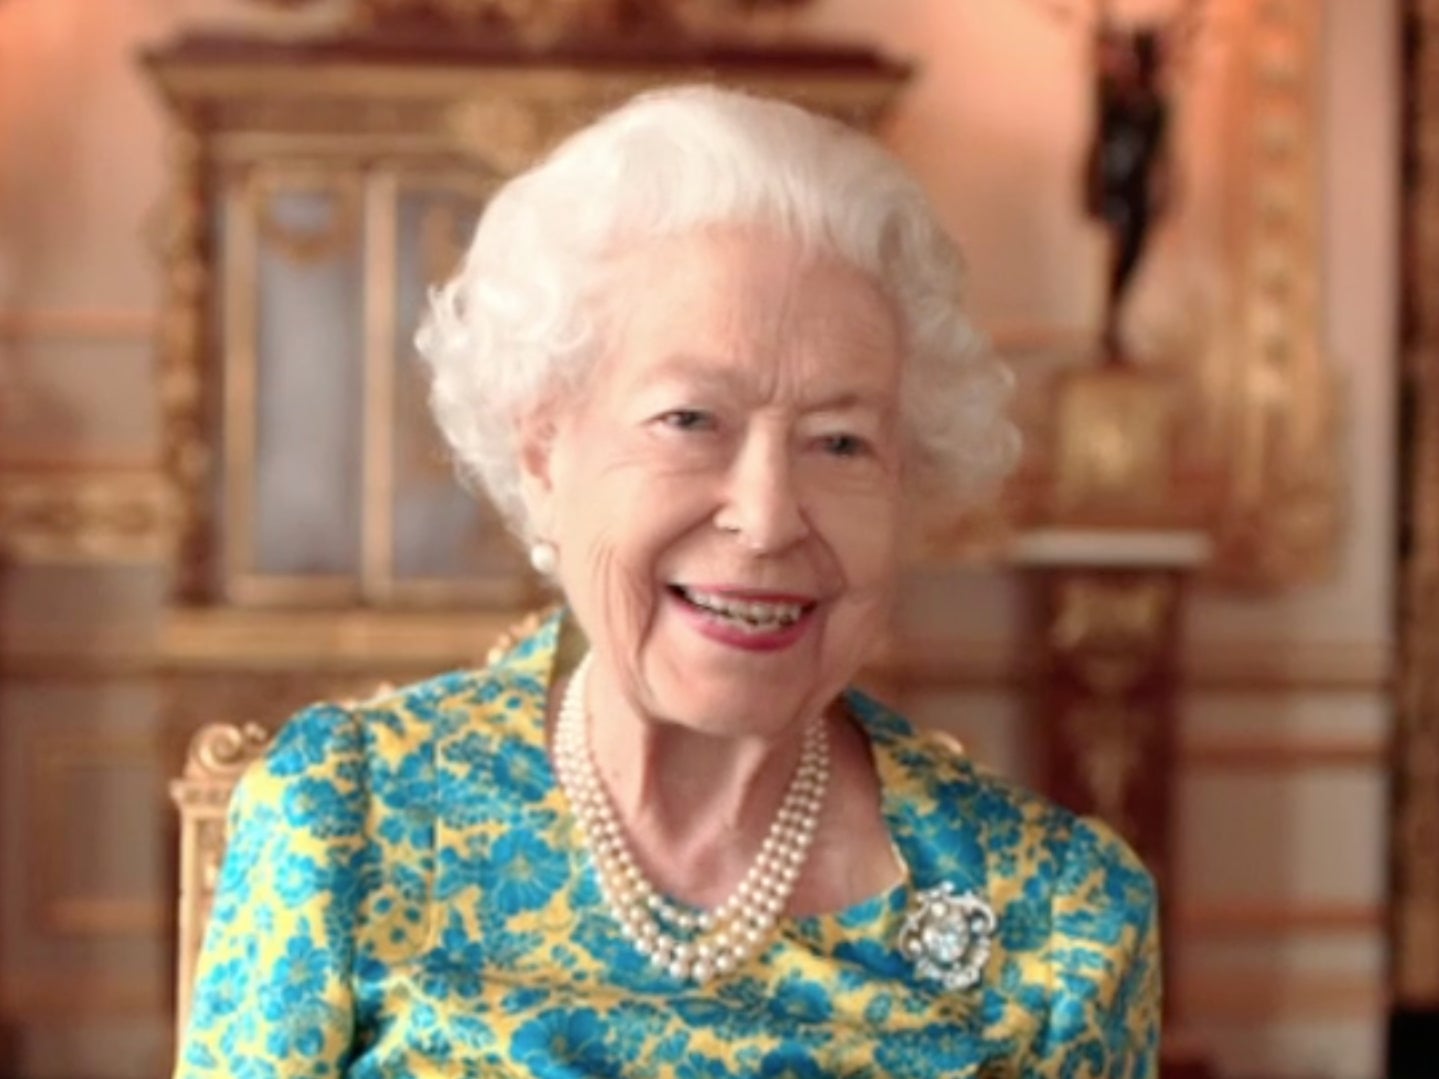 The Queen showed off her acting skills at the start of her jubilee concert